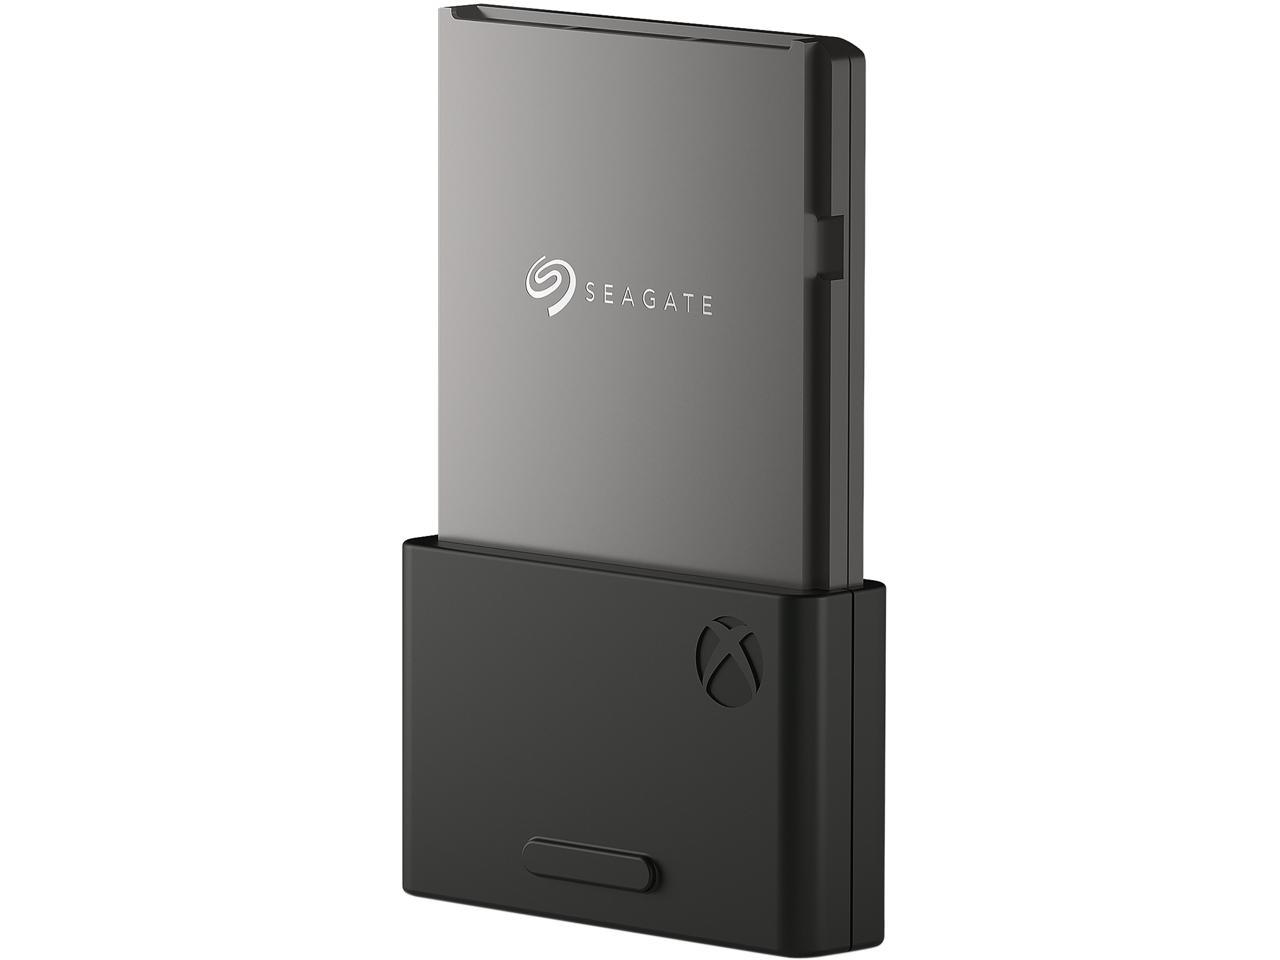 1TB Seagate Storage Expansion Card for Xbox Series X|S SSD @Newegg $187